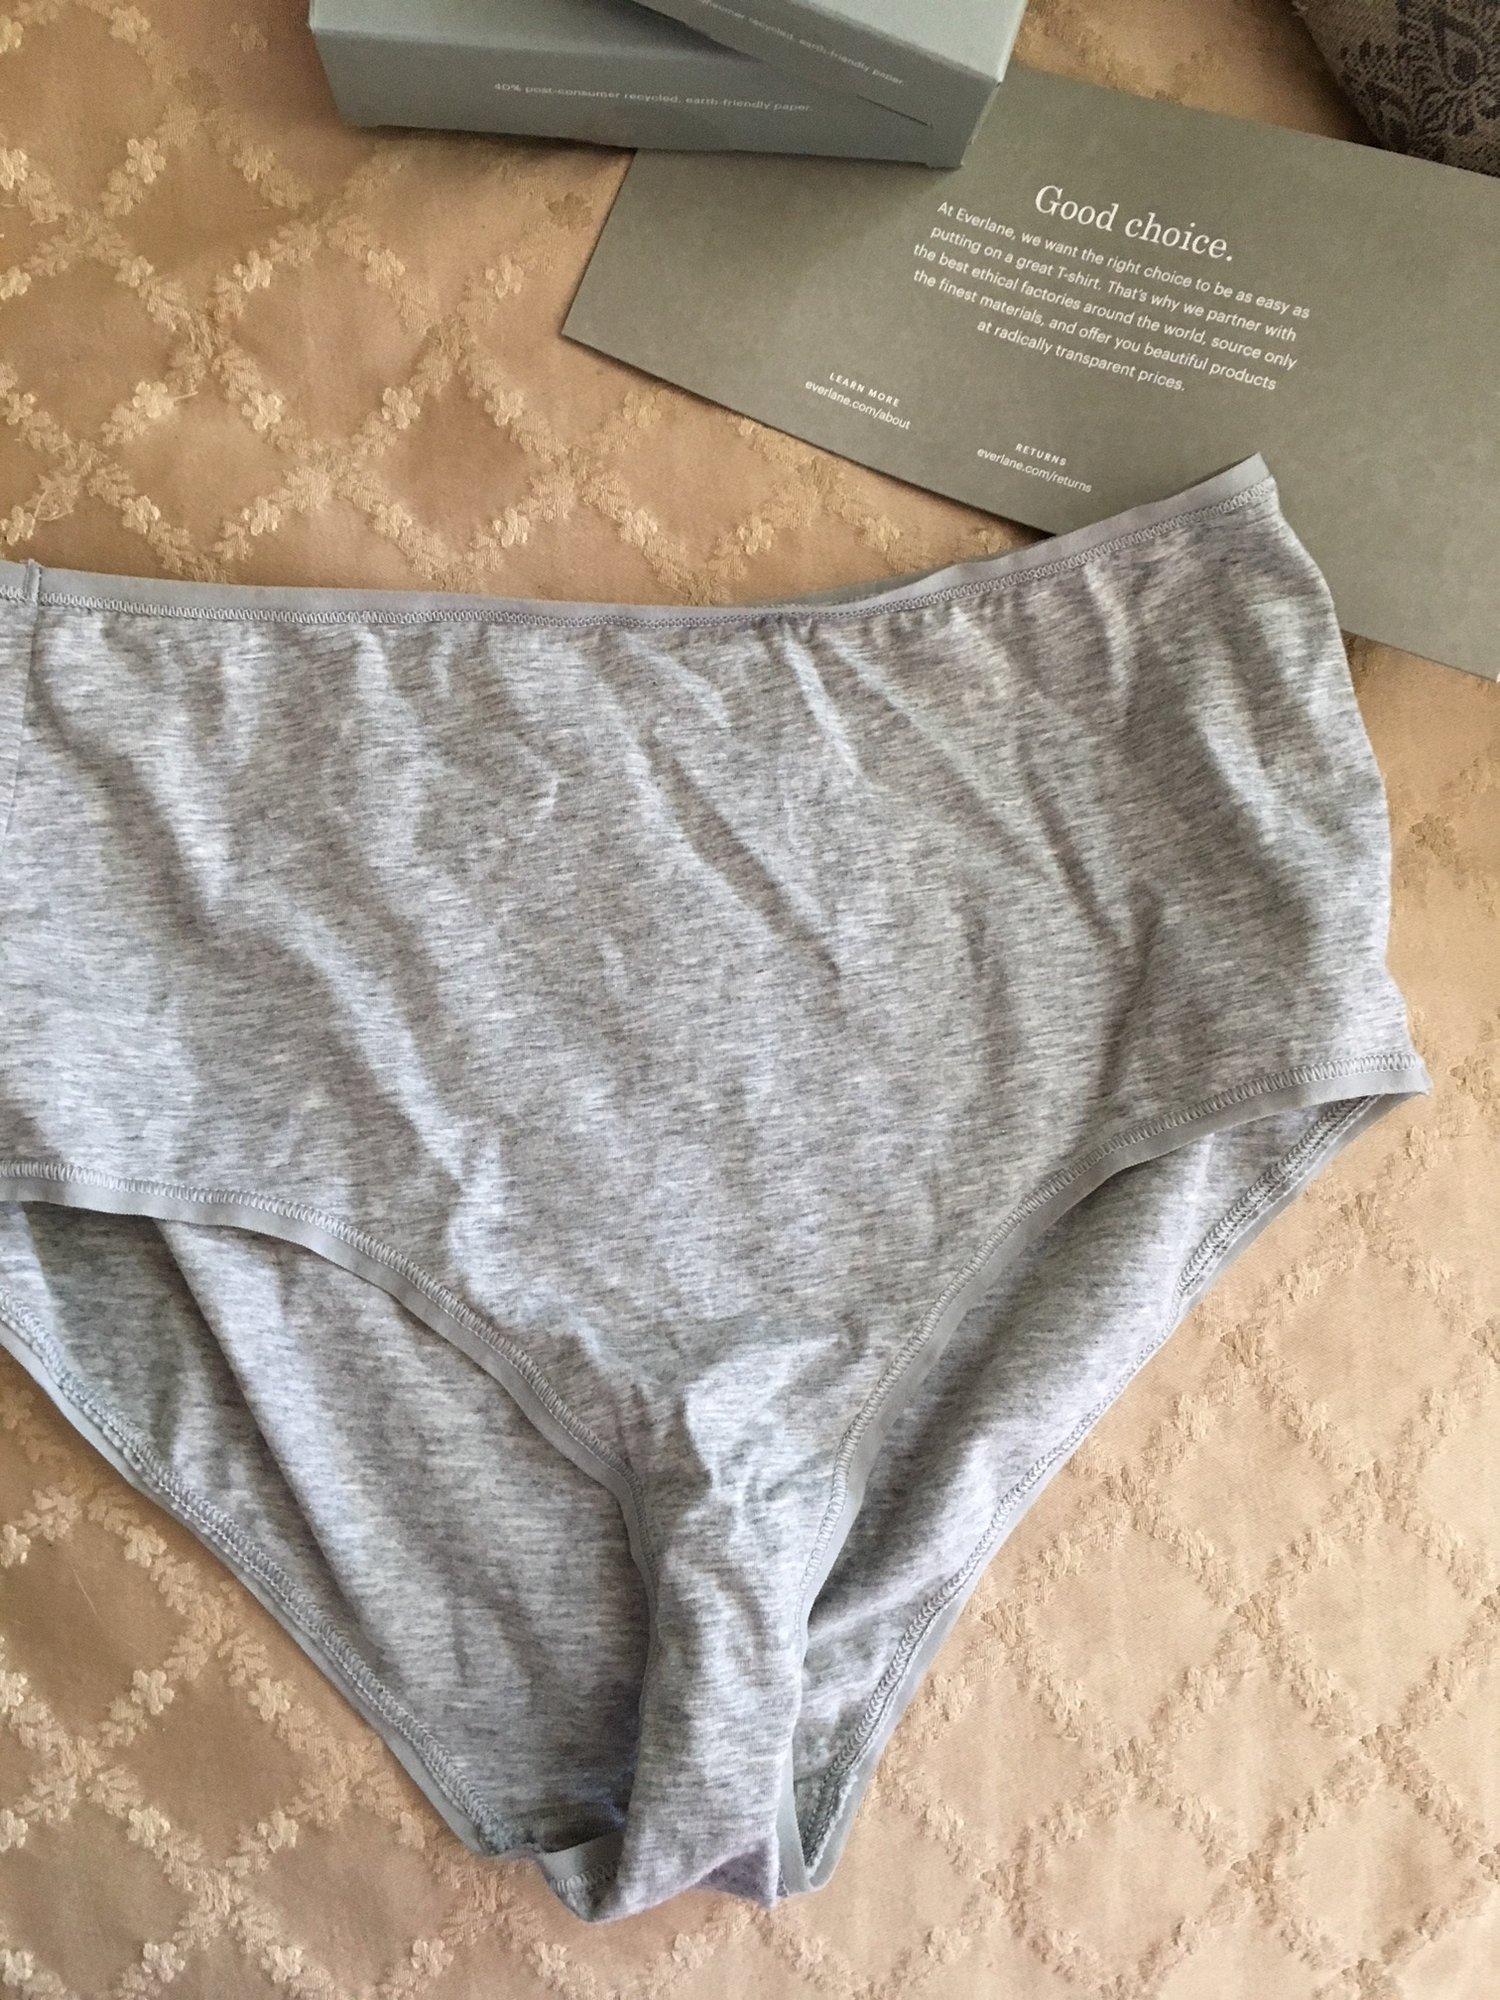 Everlane Undies Review — Mad Cat Quilts